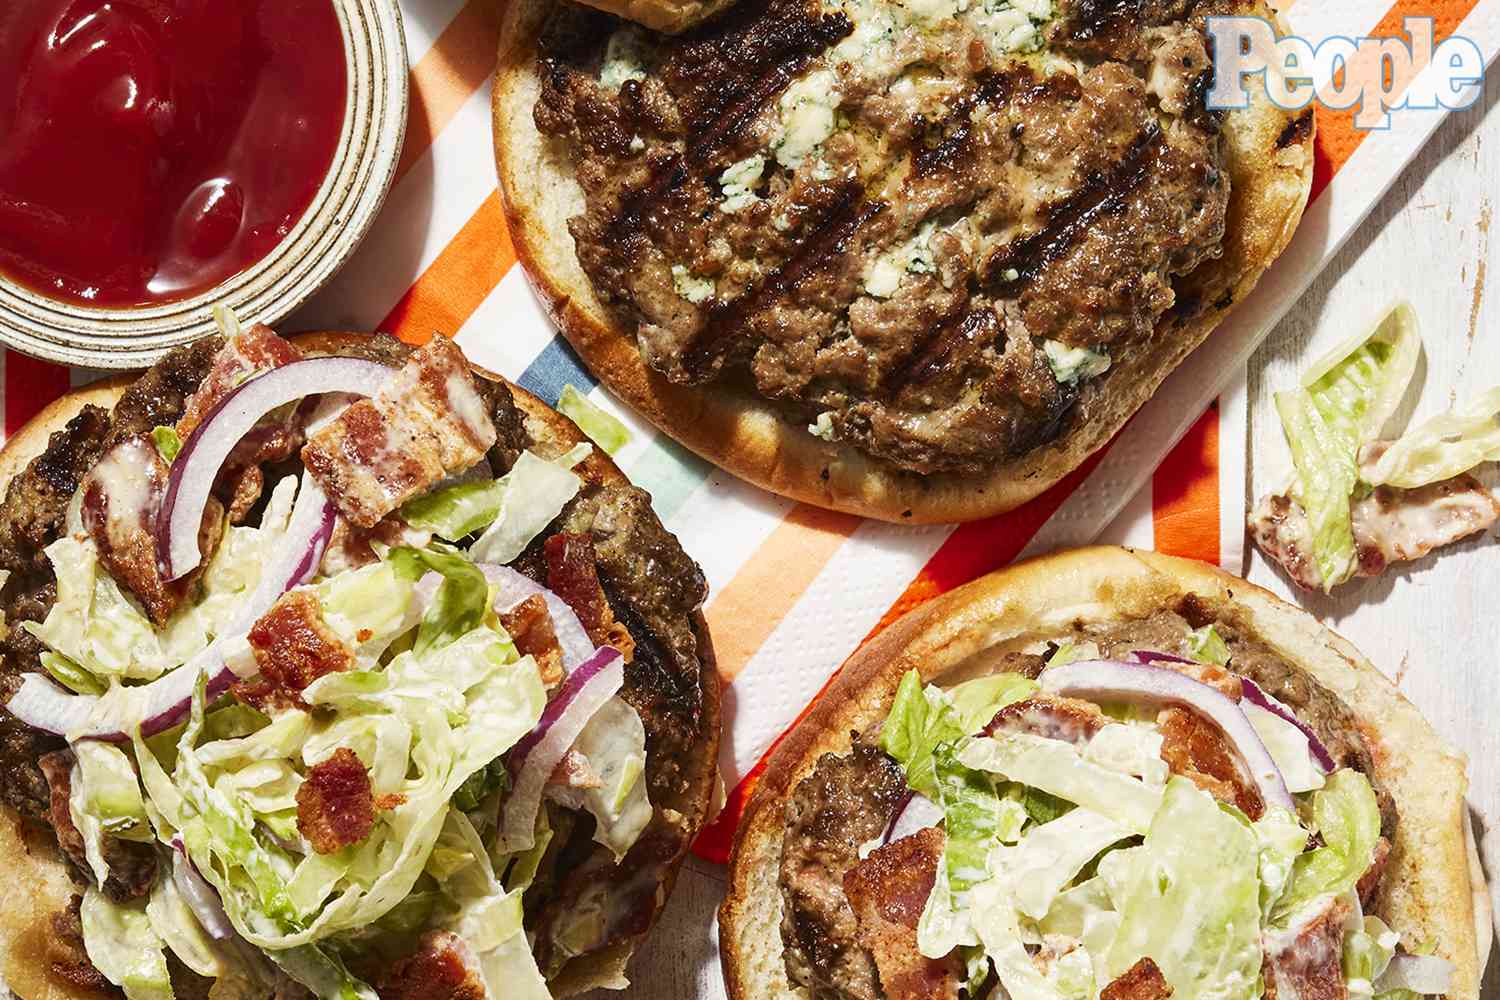 The Best Grilling Recipes to Make All Summer Long